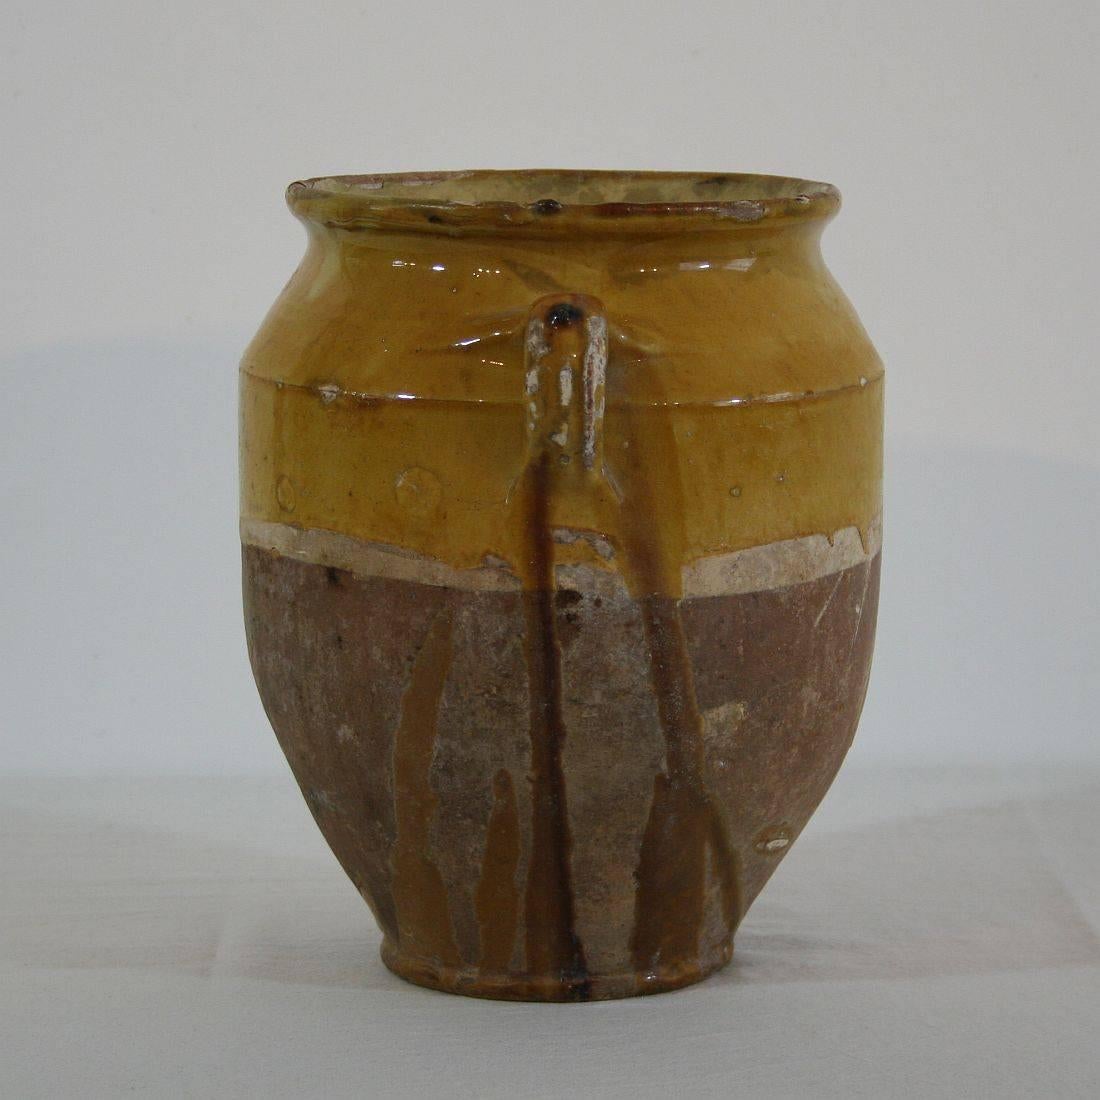 Beautiful weathered confit jar. Confit jars were used primarily in the South of France for the preservation of meats such as duck or goose for dishes such as cassoulet or foie gras. The bottom halves were left unglazed, due to the fact that the pots